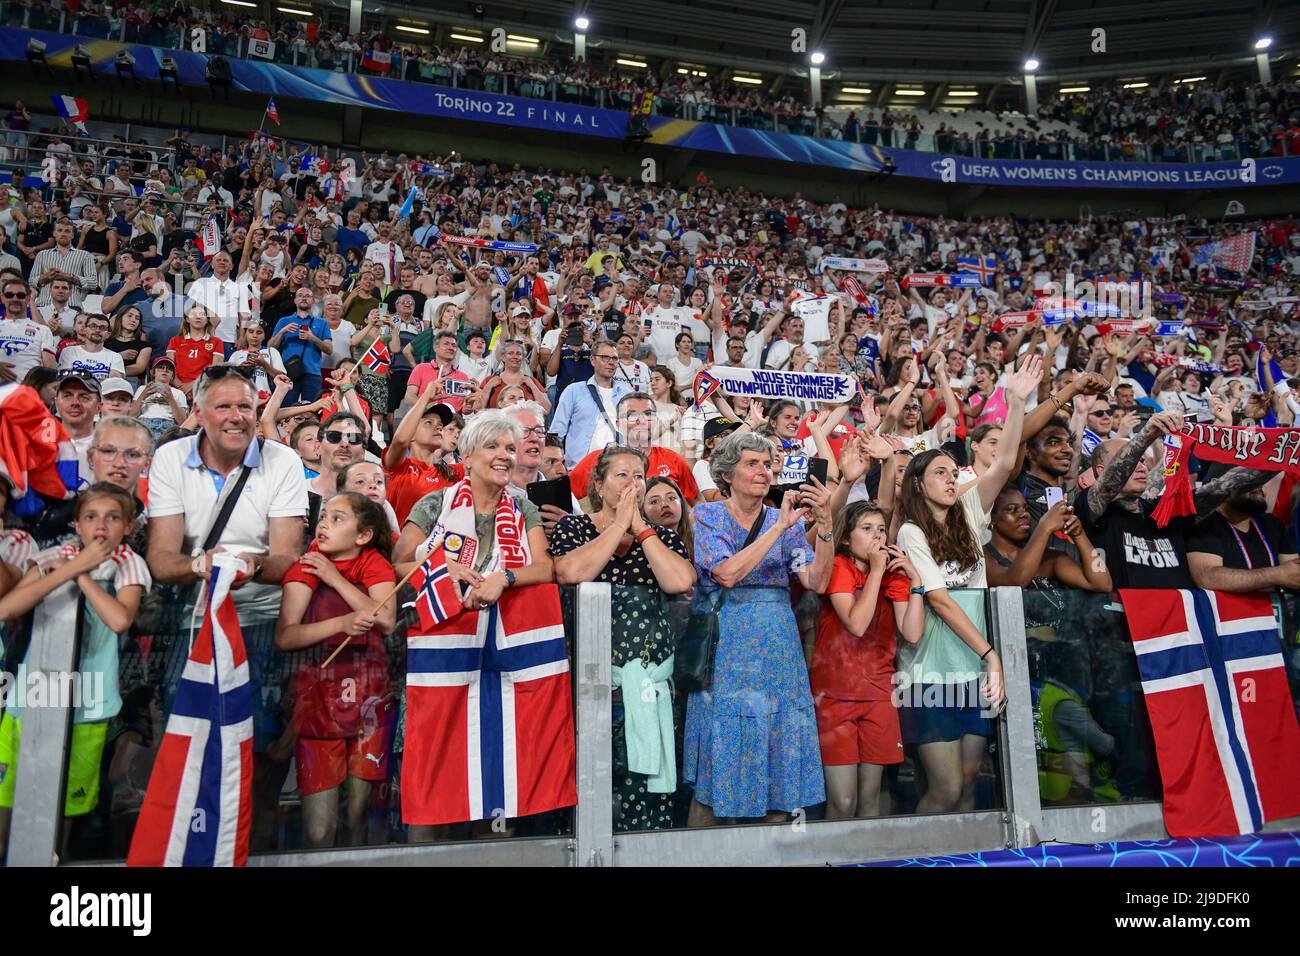 Turin, Italy. 21st, May 2022. Norwegian football fans of Olympique Lyon seen on the stands during the UEFA Women’s Champions League final between Barcelona and Olympique Lyon at Juventus Stadium in Turin. (Photo credit: Gonzales Photo - Tommaso Fimiano). Stock Photo